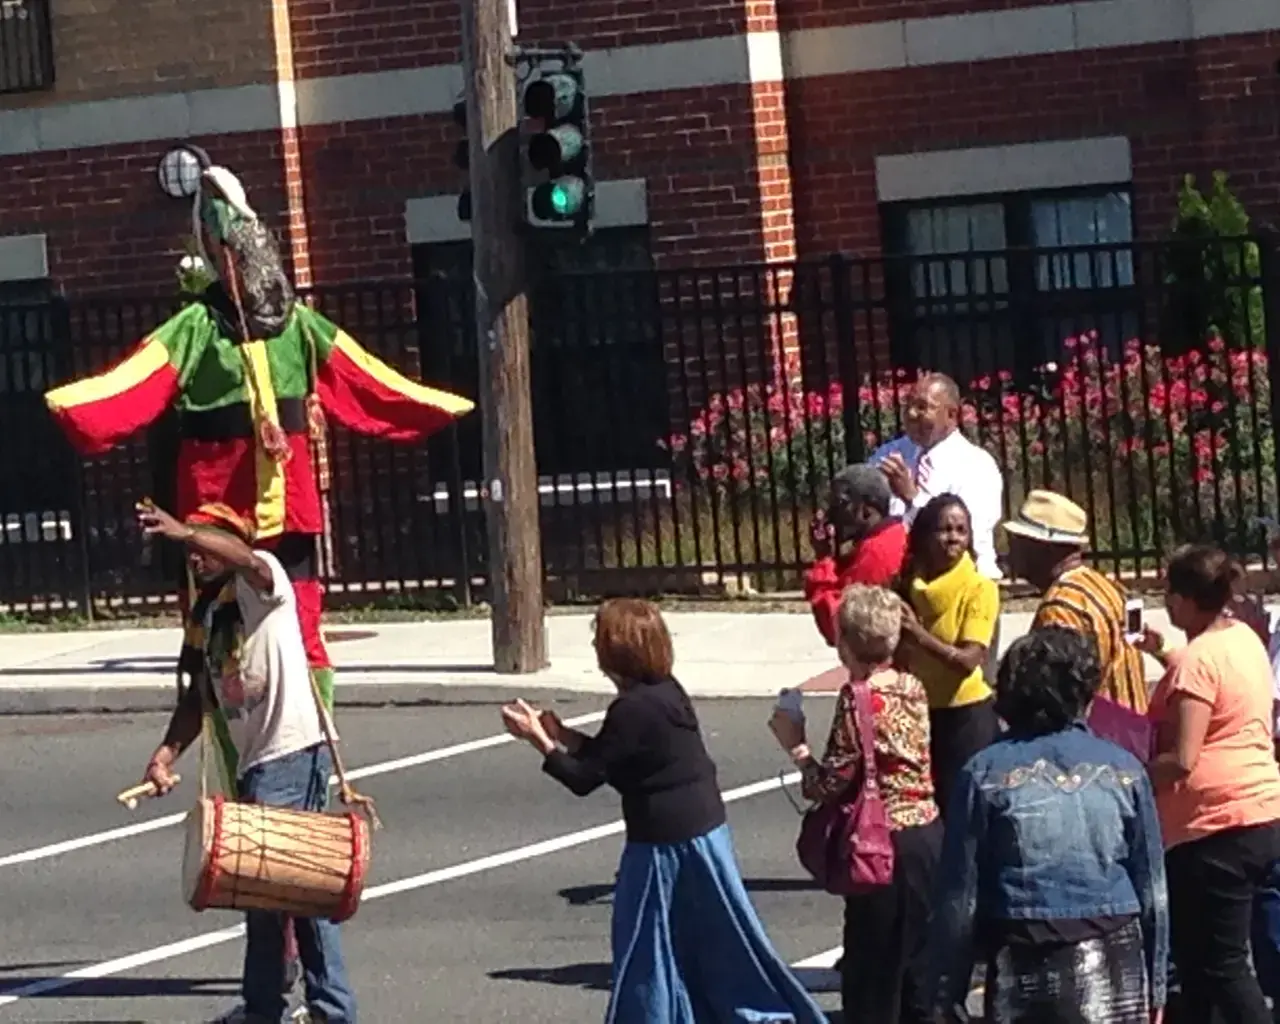 Deshong Commemoration Day, with a stilt walker from the African Masquerade Society of Philadelphia leading the Mayor and the people of Chester in a symbolic cultural walk to clear the path for spiritual restoration in the park. Photo courtesy of the Pennsylvania Humanities Council.